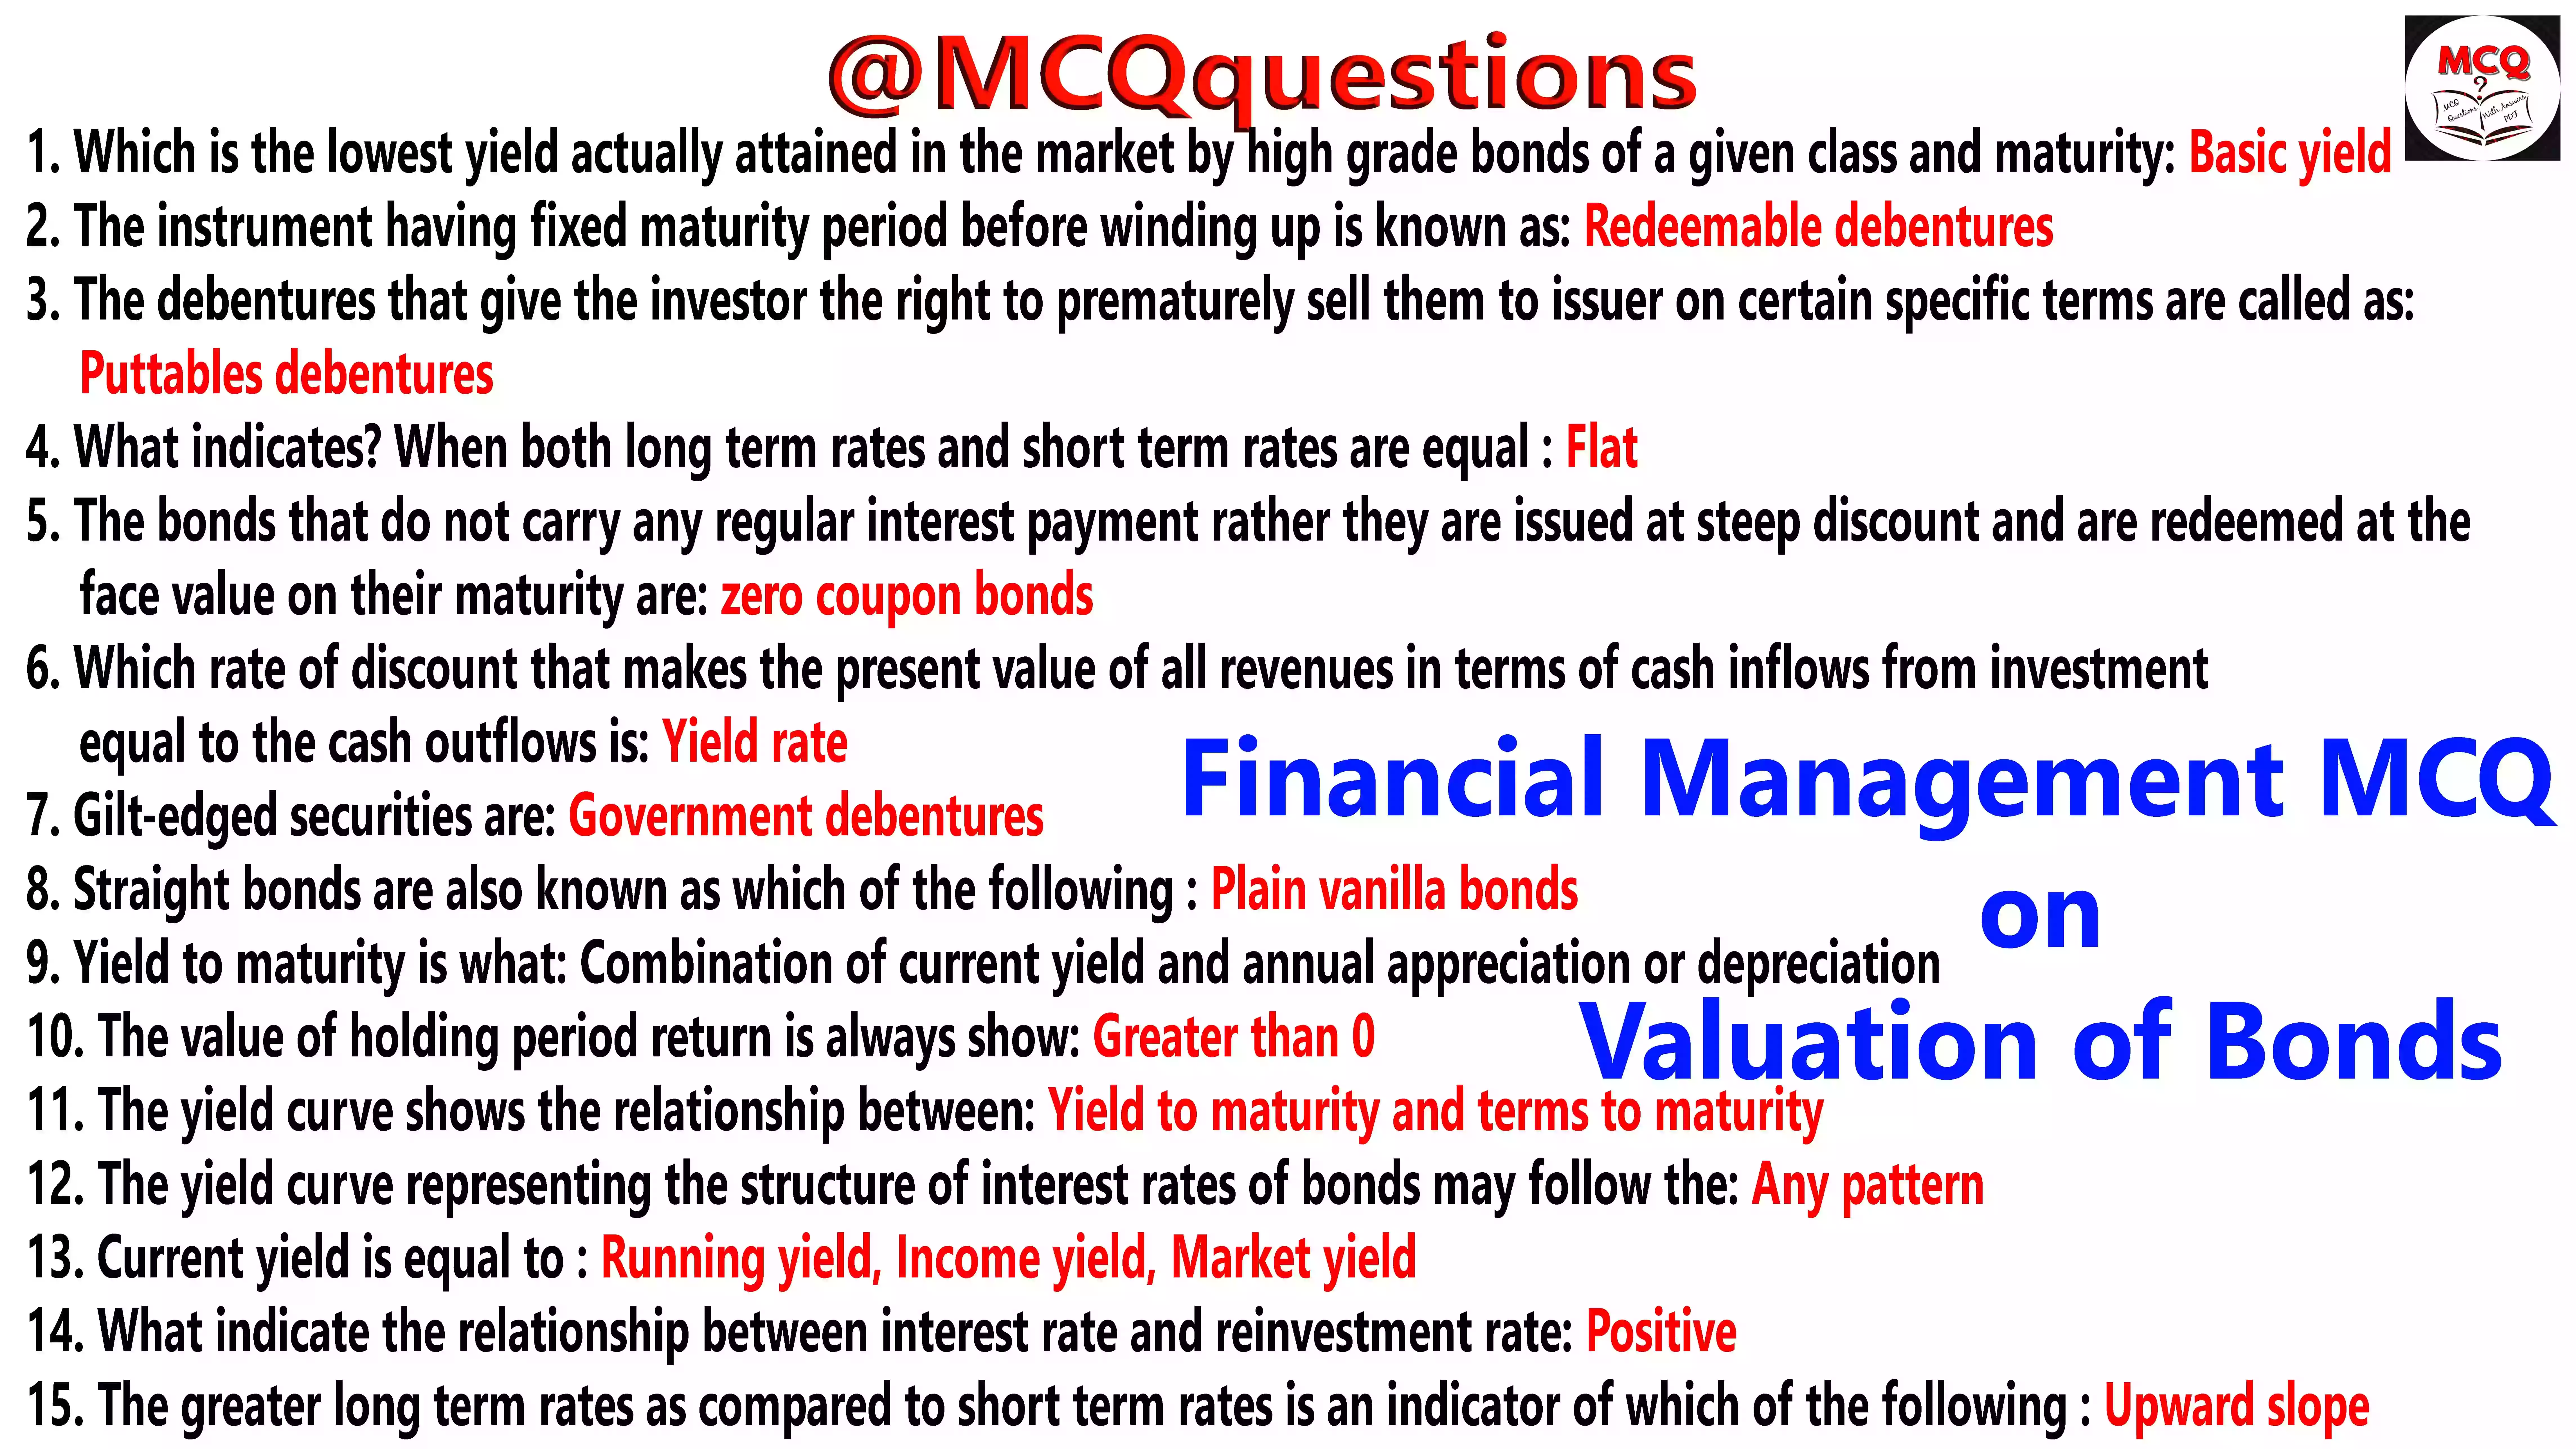 Financial Management MCQ on Valuation of Bonds